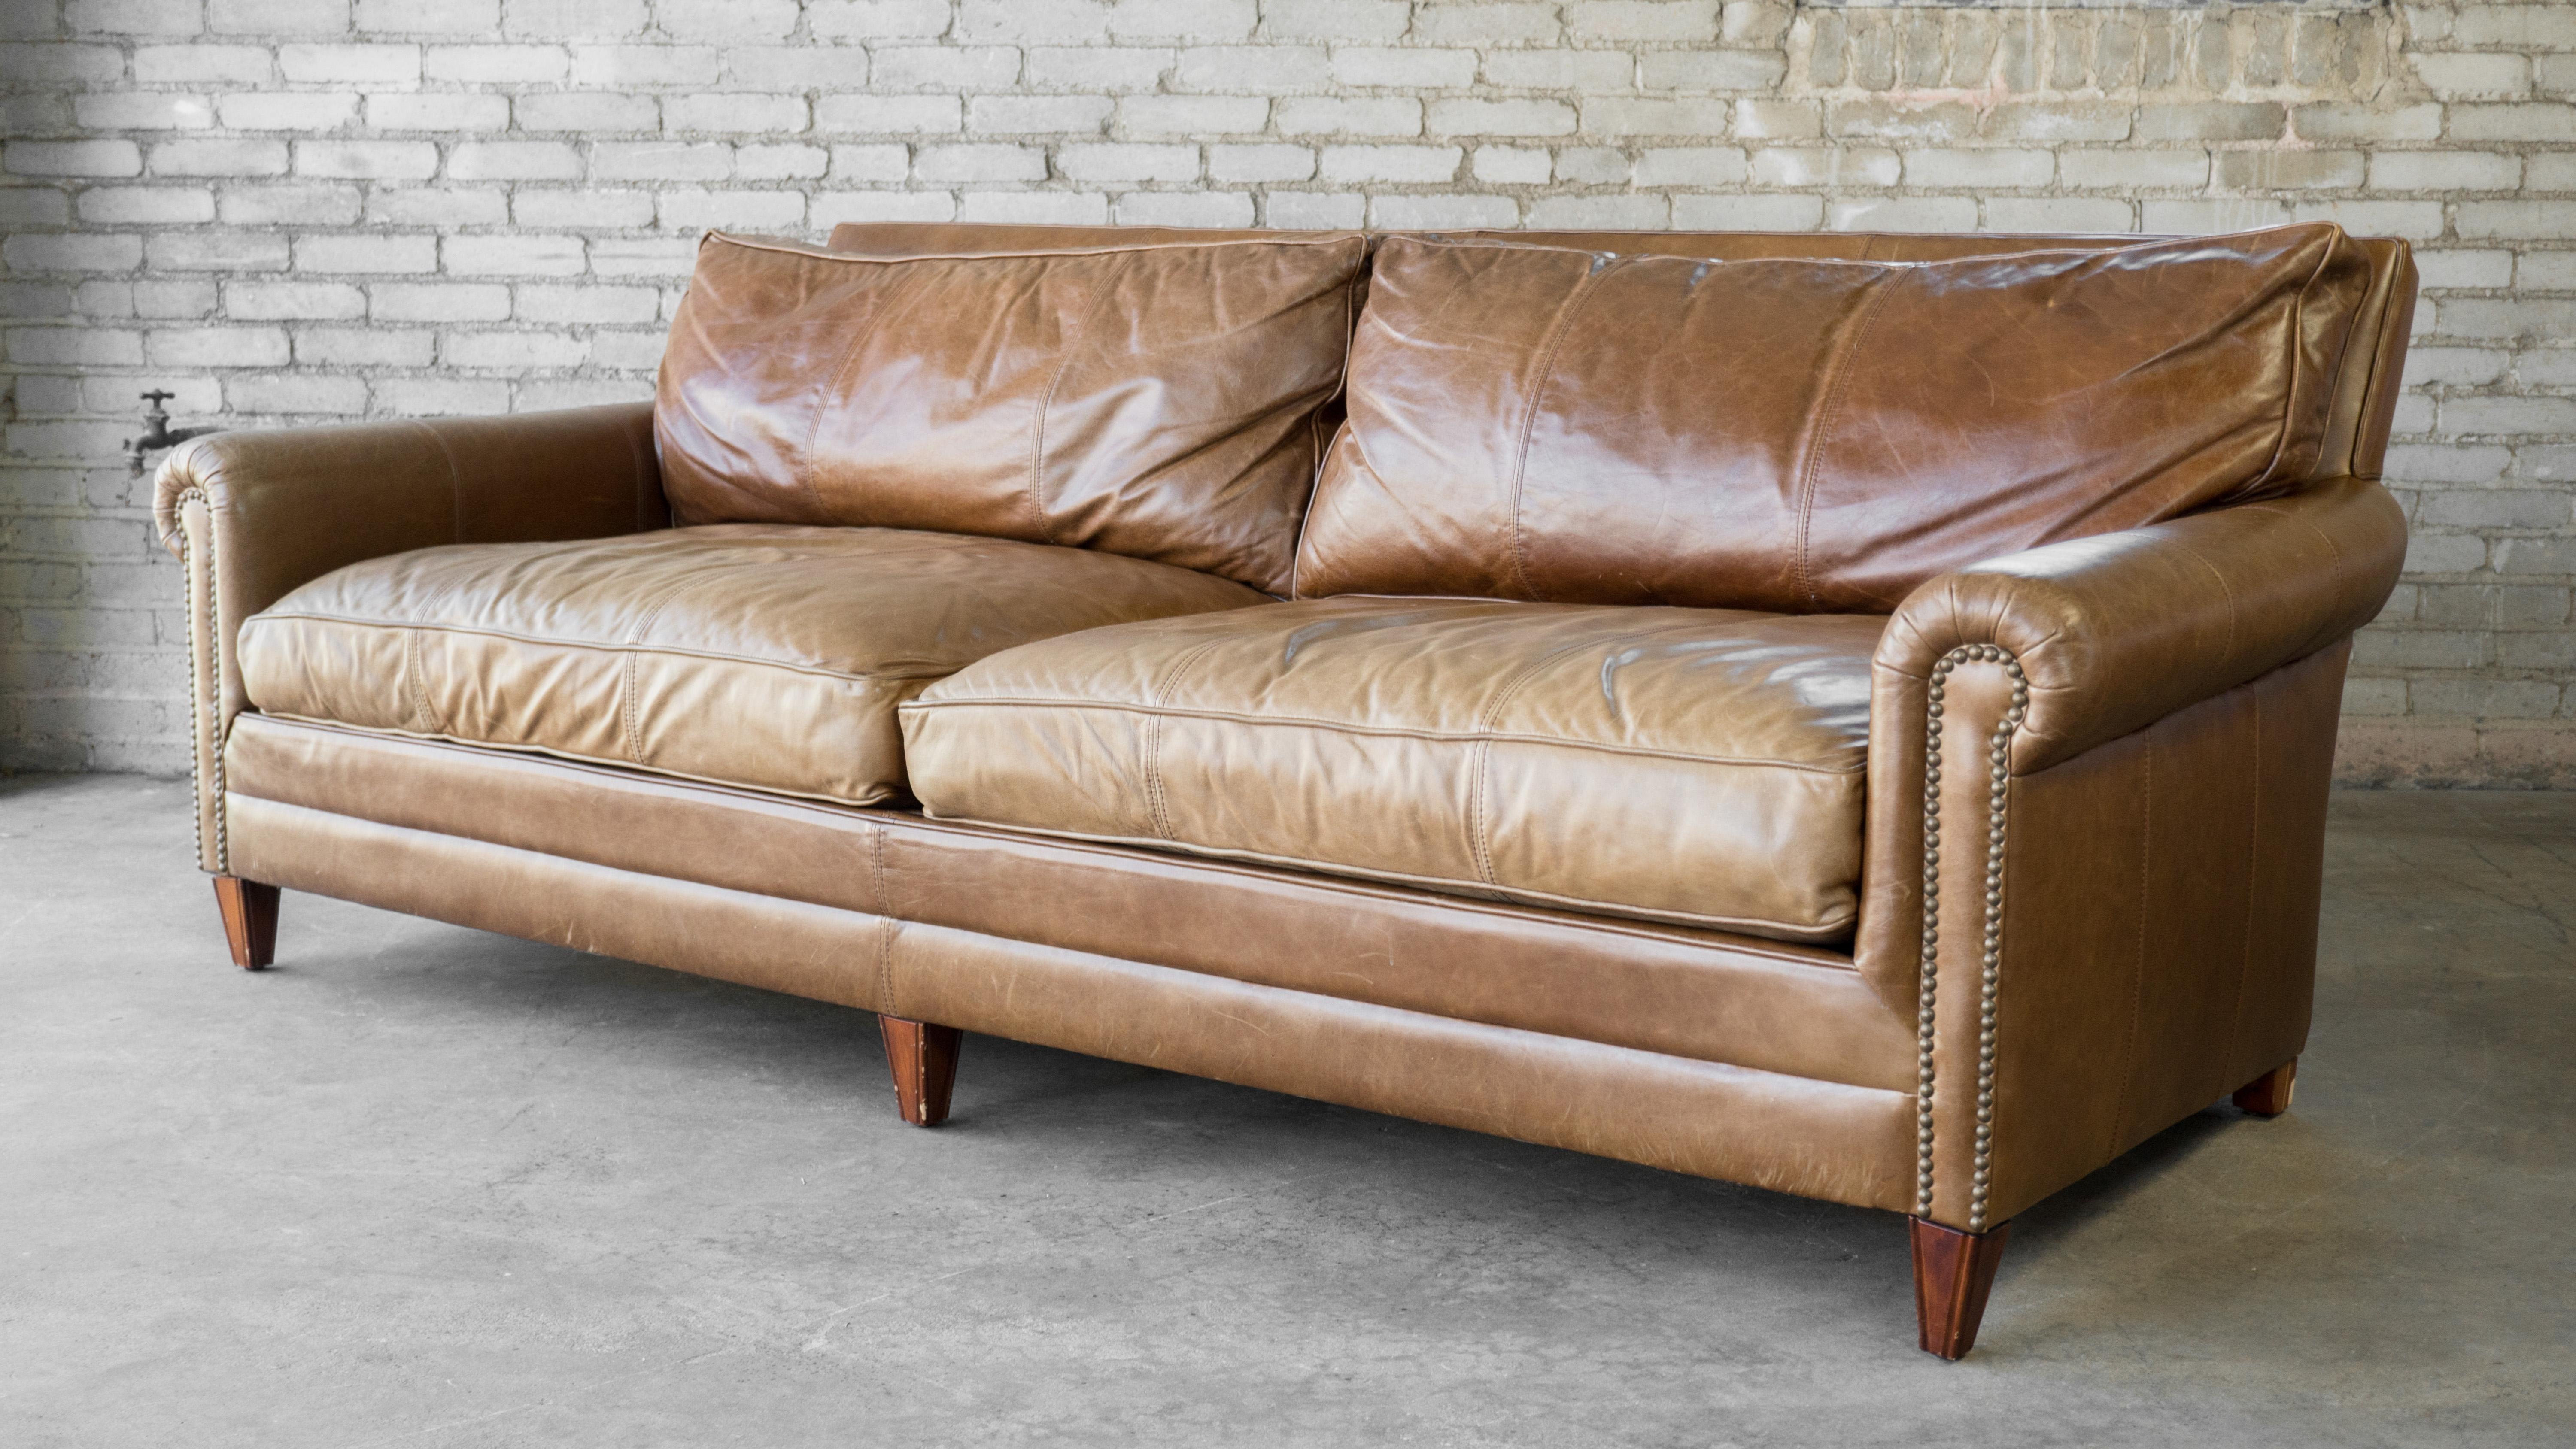 Gorgeous Ralph Lauren MacIntyre leather sofa. Wrapped in beautiful lightly distressed cigar brown leather with thick stitching details. Traditional English roll-arm style with paramount elegance and comfort. Brass nailhead trim. Oversized